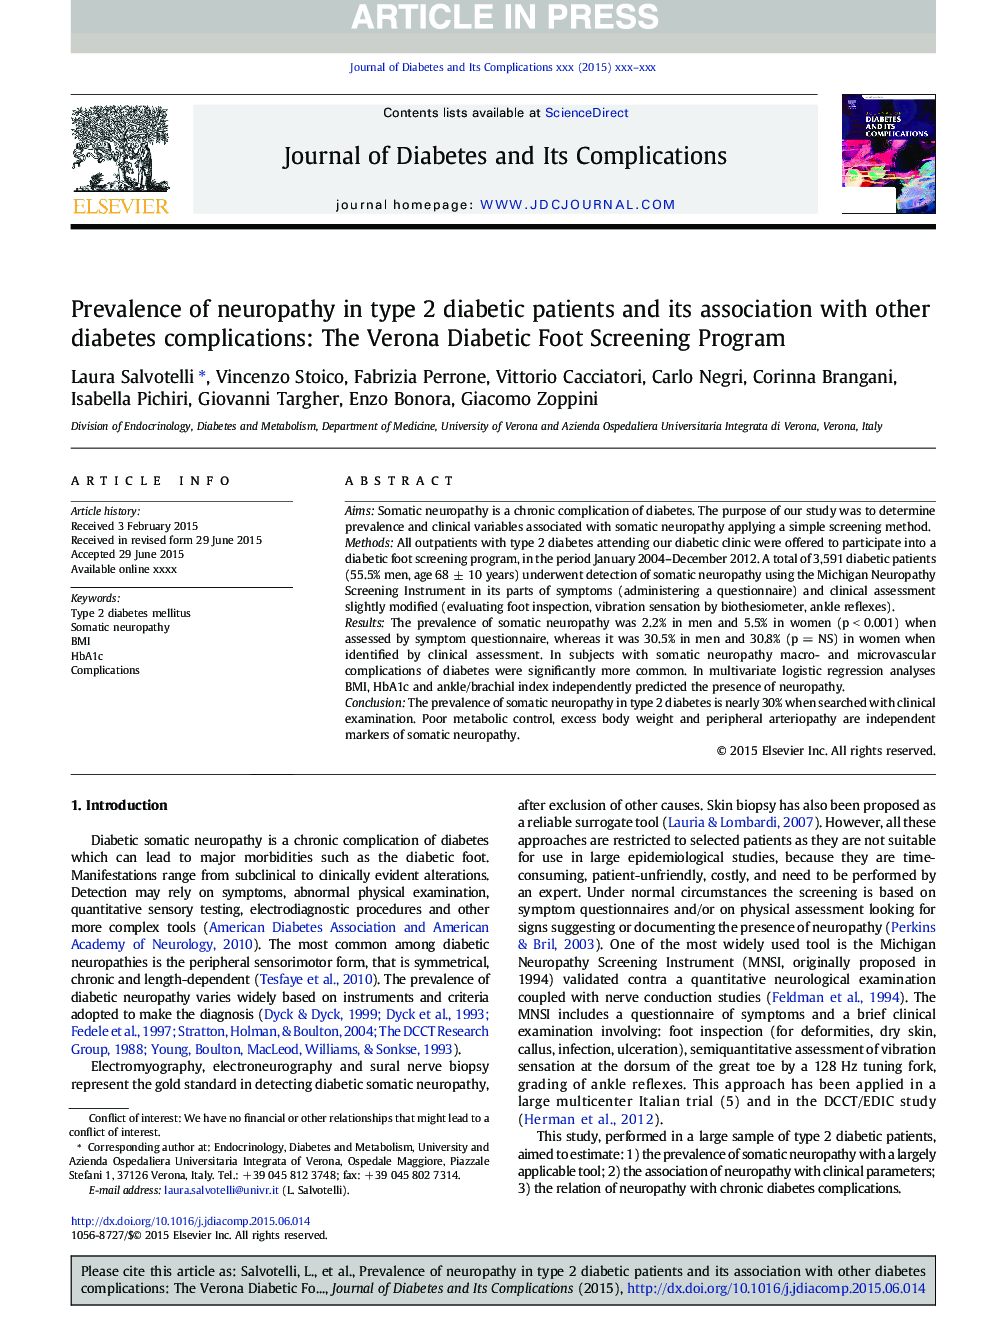 Prevalence of neuropathy in type 2 diabetic patients and its association with other diabetes complications: The Verona Diabetic Foot Screening Program